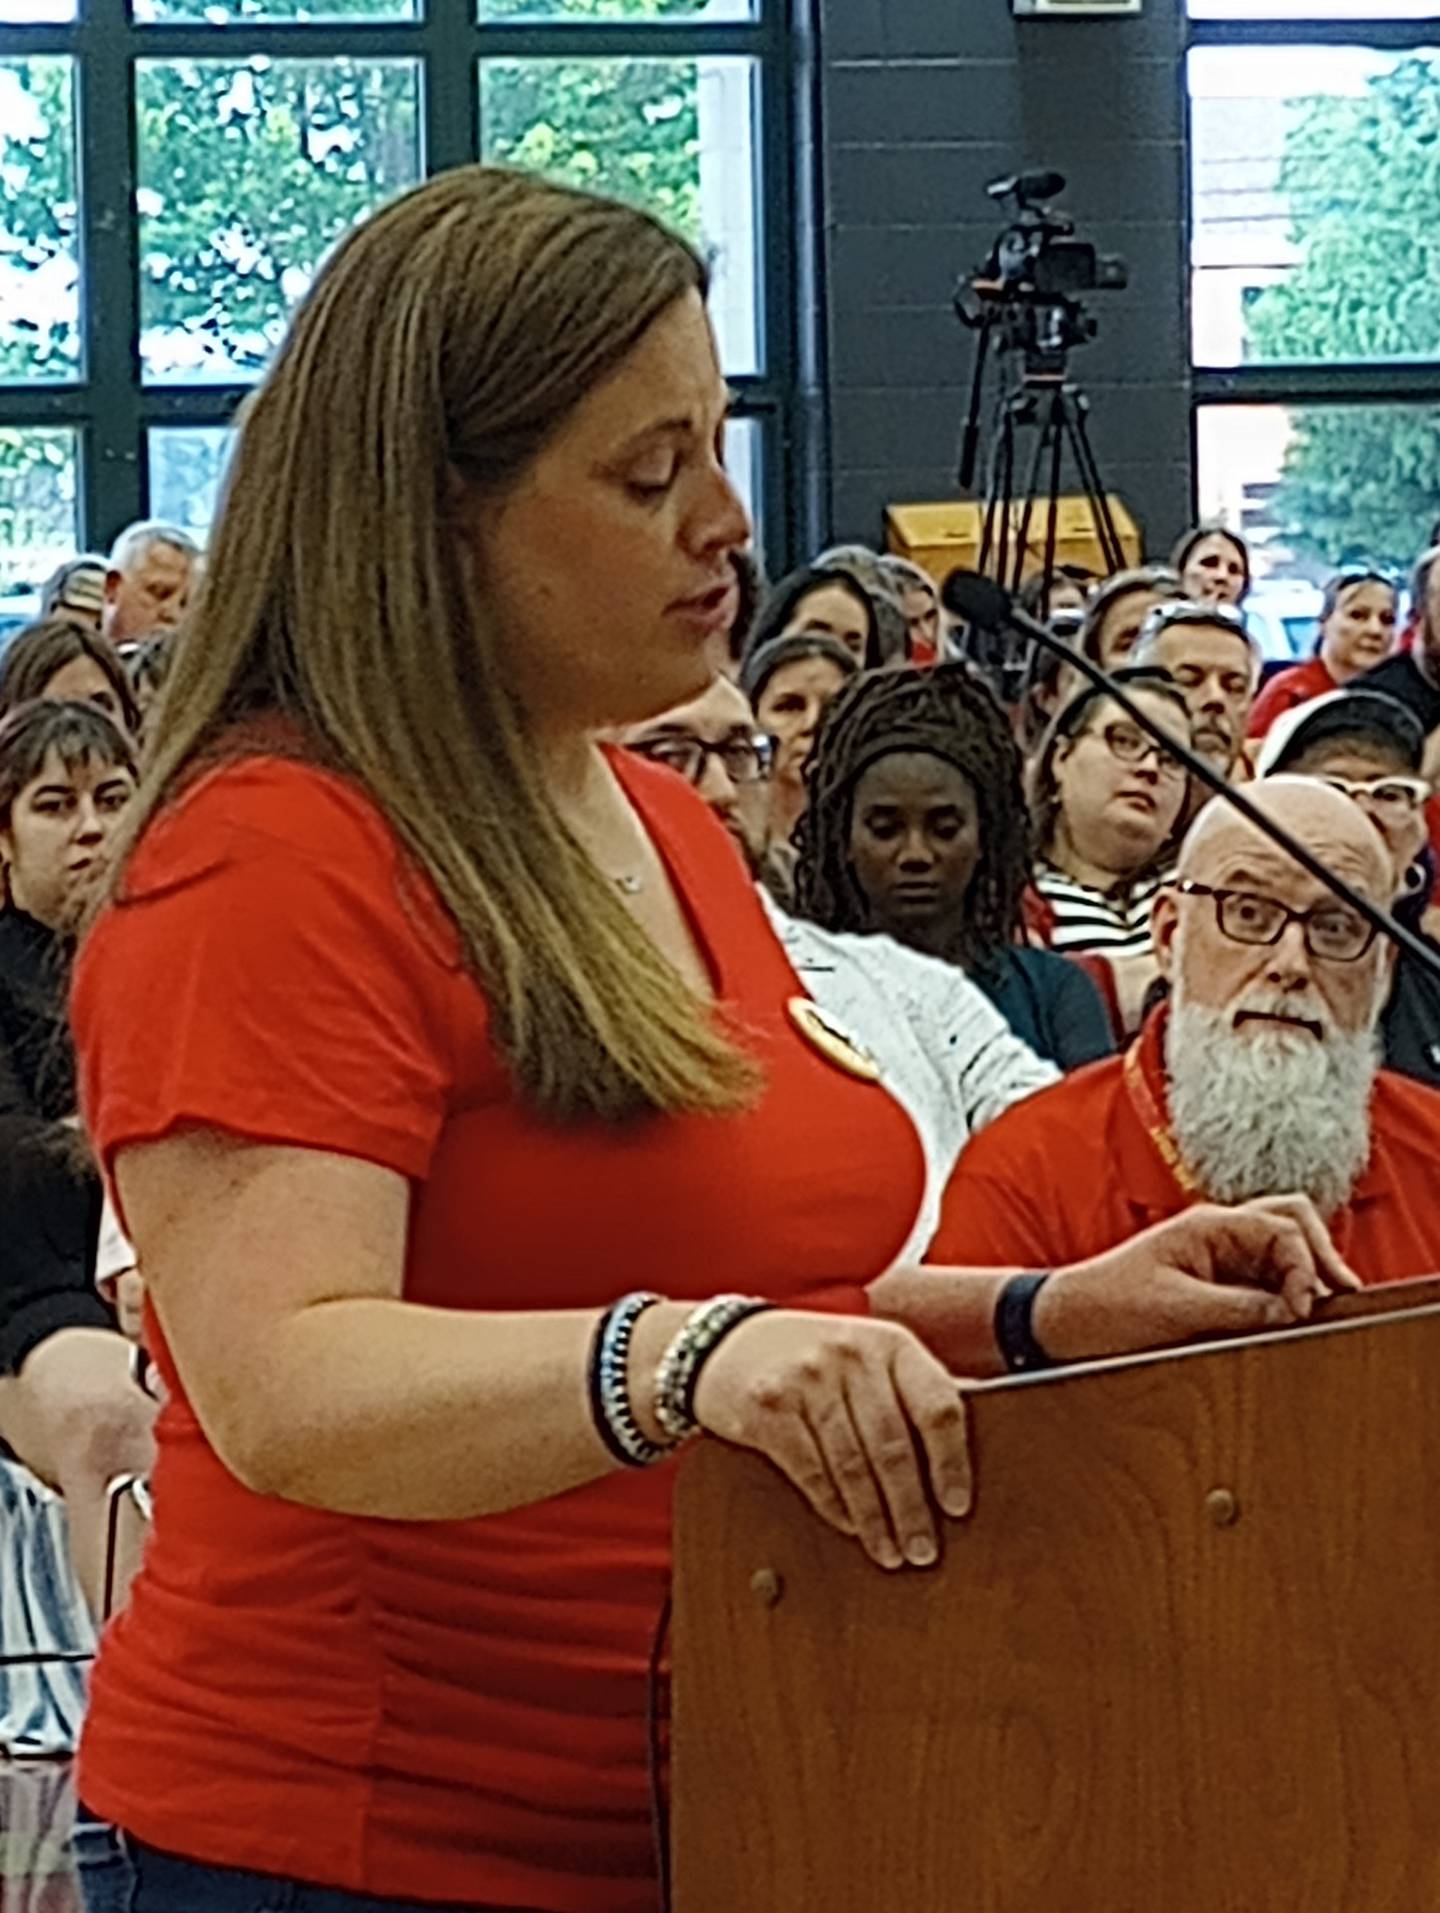 Sarah Barrett, a member of the Batavia Education Association said she came to the Batavia District 101 meeting Tuesday to 'show our appreciation to the administration and board's recent recommitment to transforming our educational environment.'